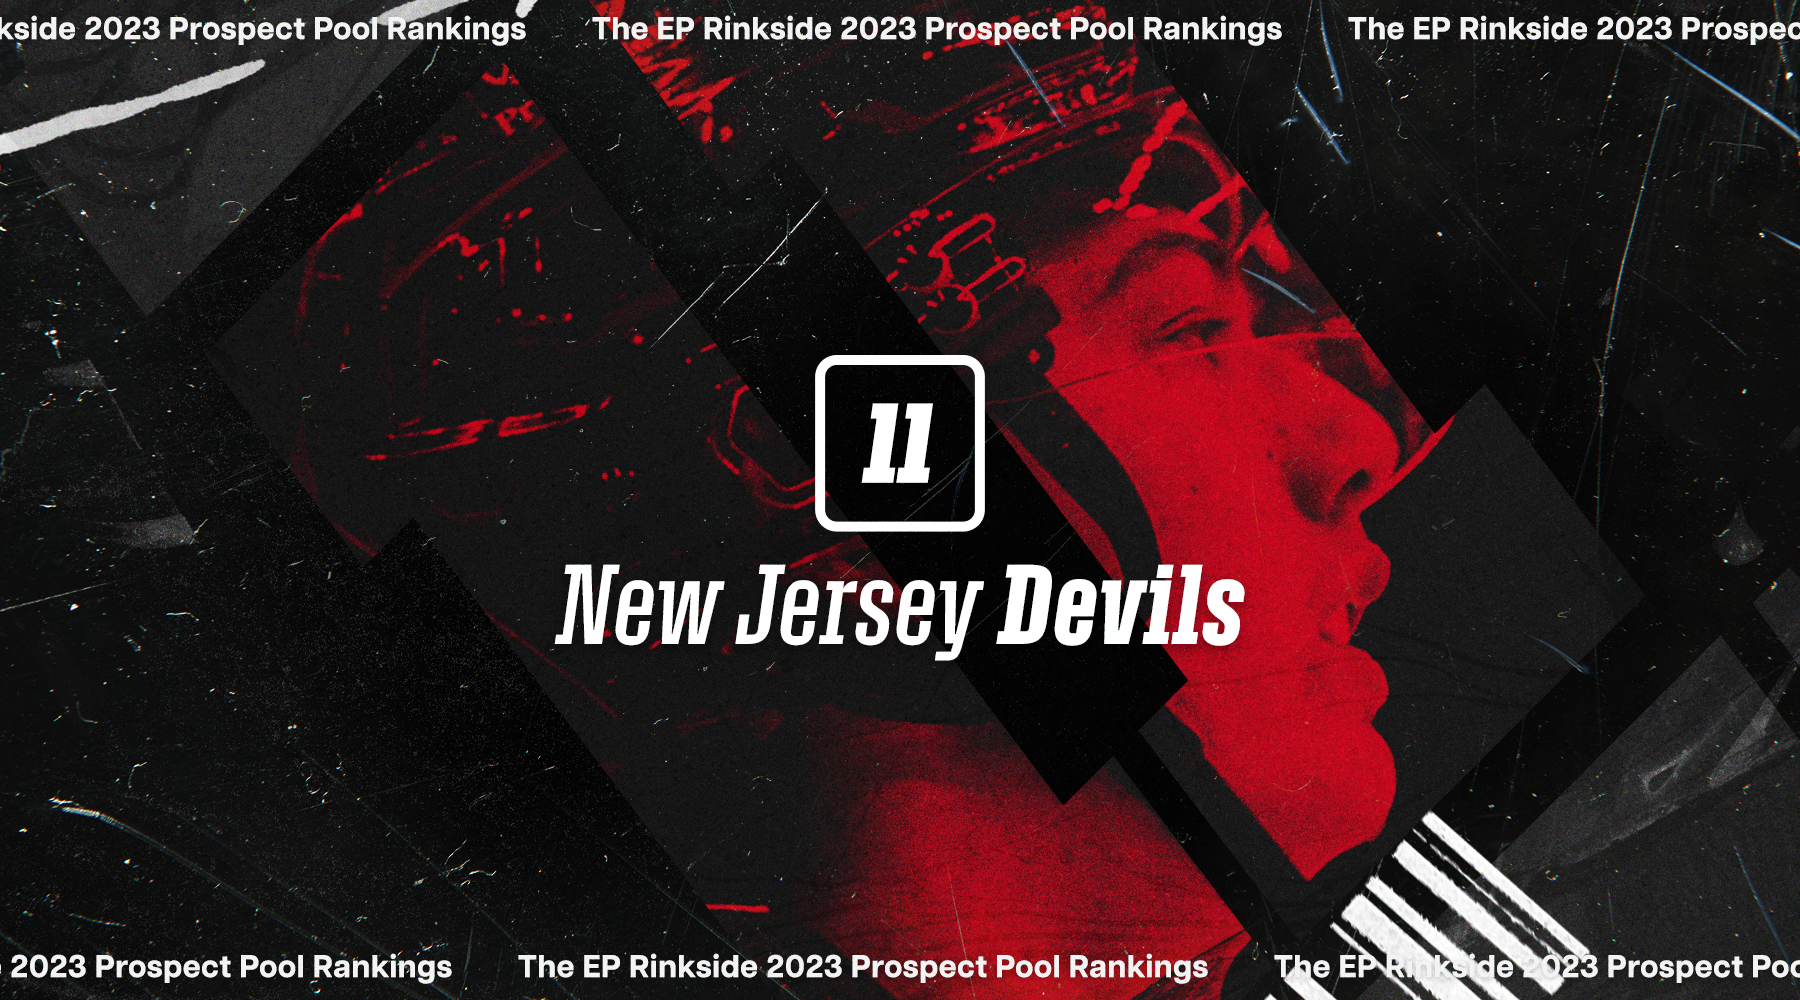 EP Rinkside 2023 NHL Prospect Pool Rankings: No. 11-ranked New Jersey Devils